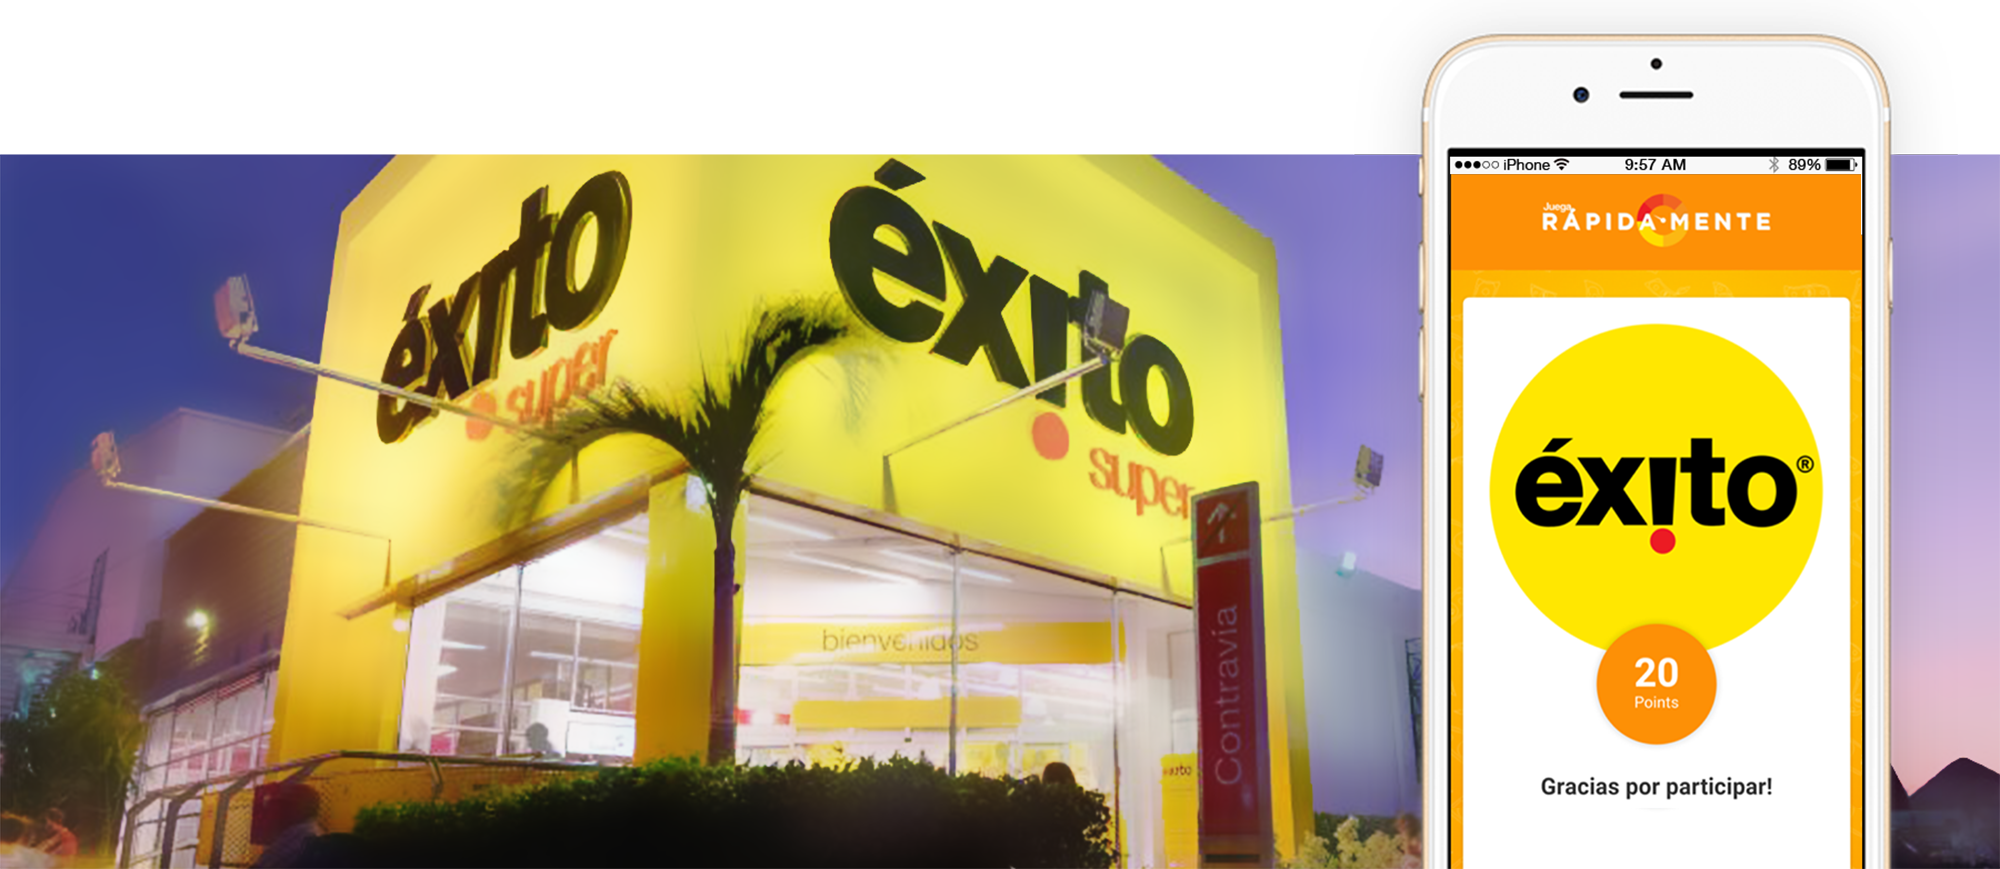 Grupo Éxito, Colombia's largest retail company operating a famous food chain